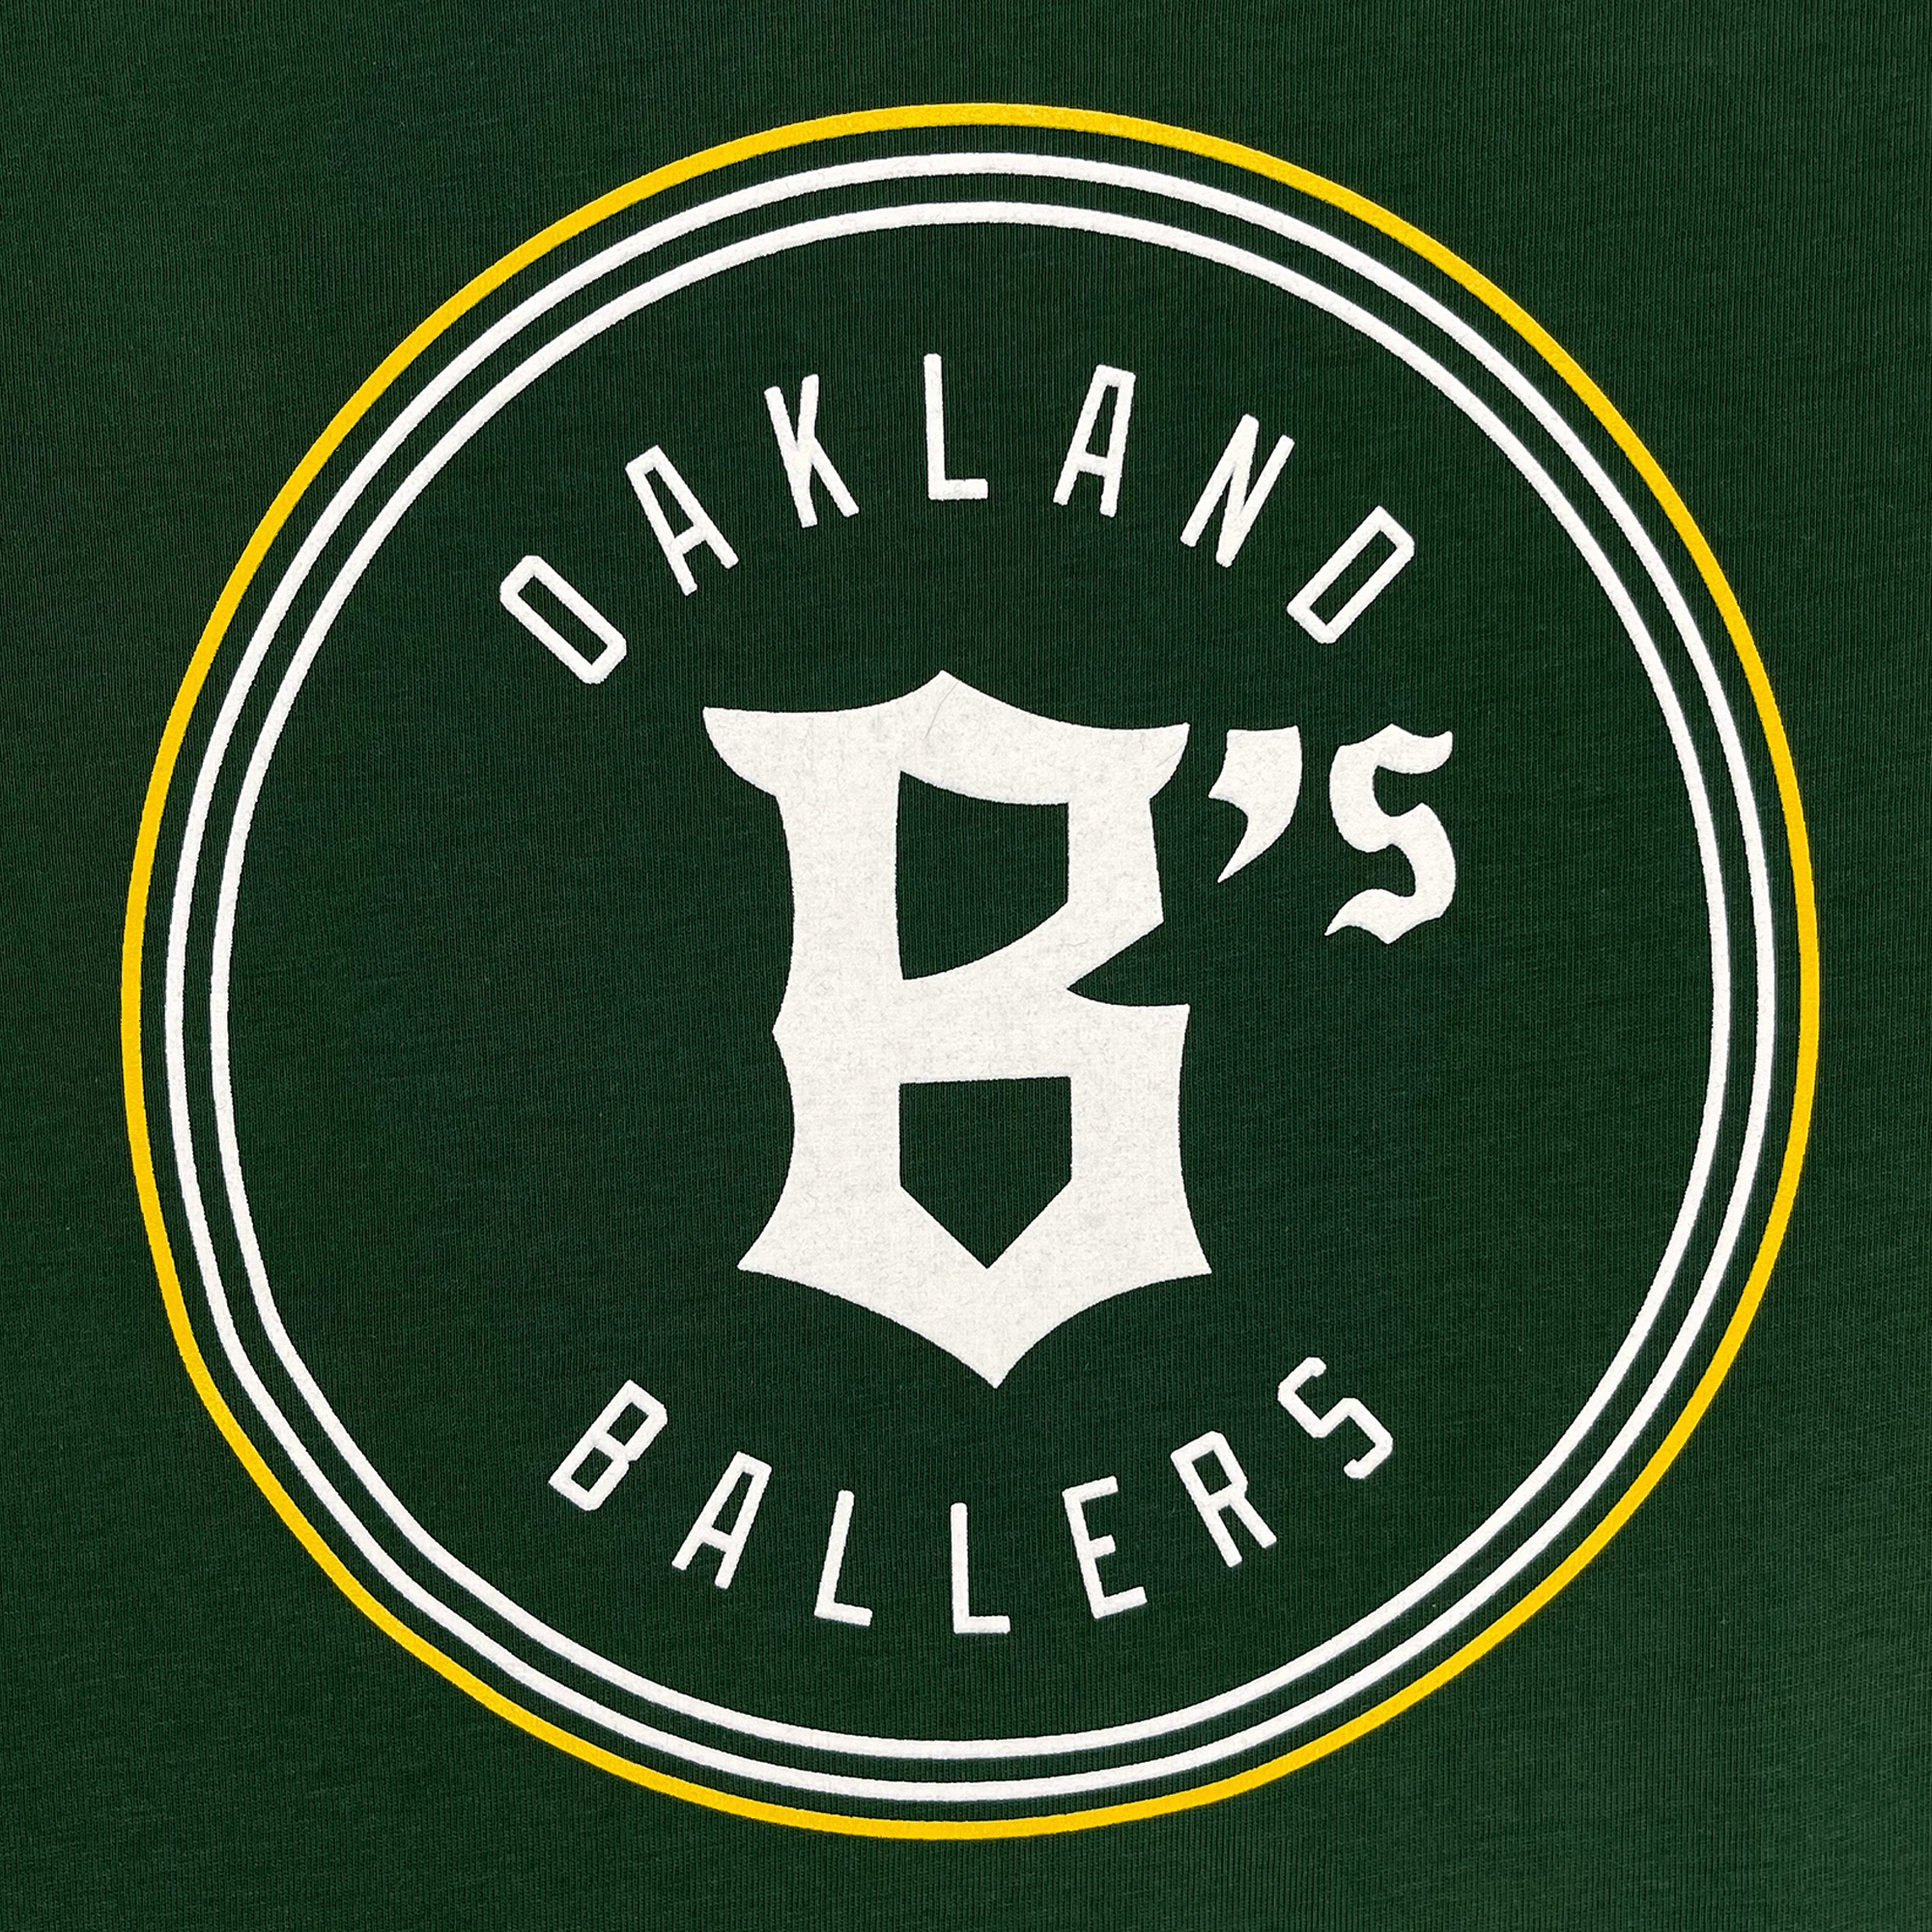 Detail photo of Oakland Ballers logo. White and Yellow circle with Oakland Ballers text on inside with B's in middle.